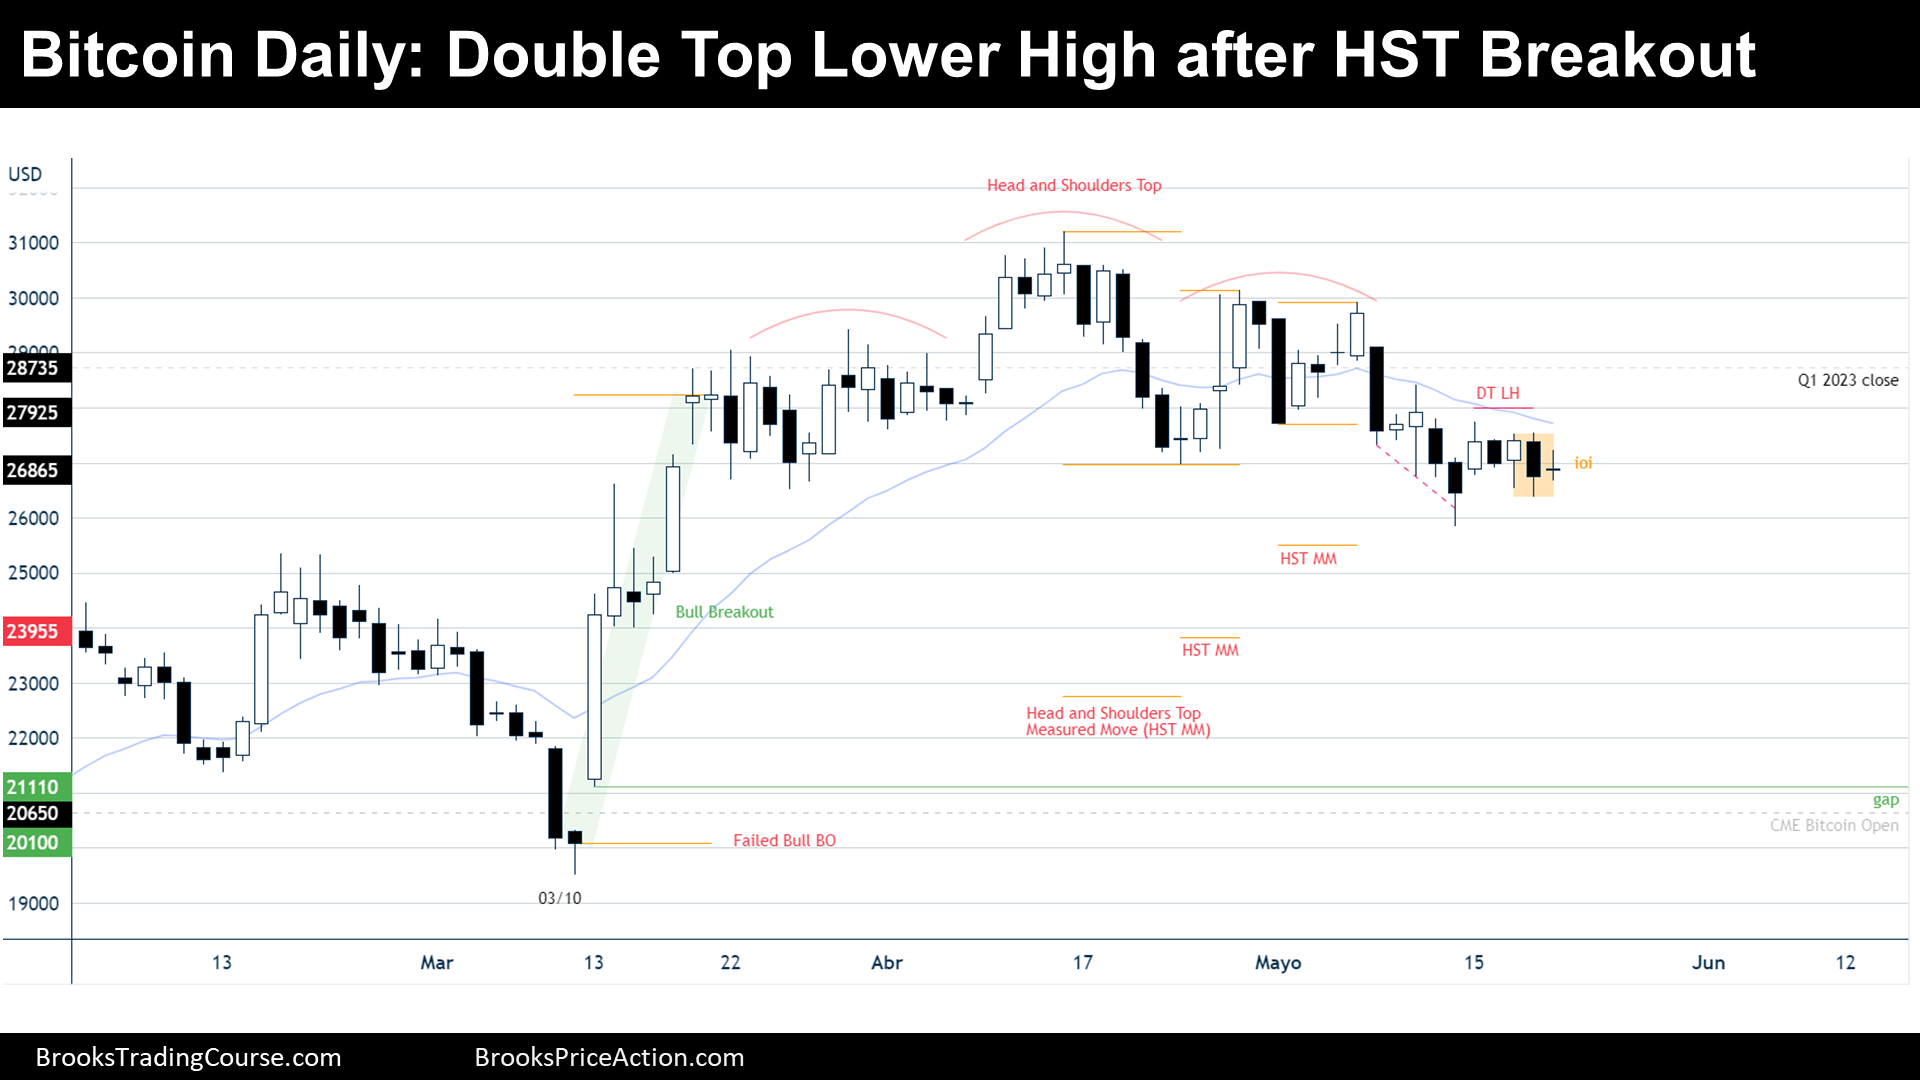 Bitcoin Daily Double Top Lower High after HST Breakout